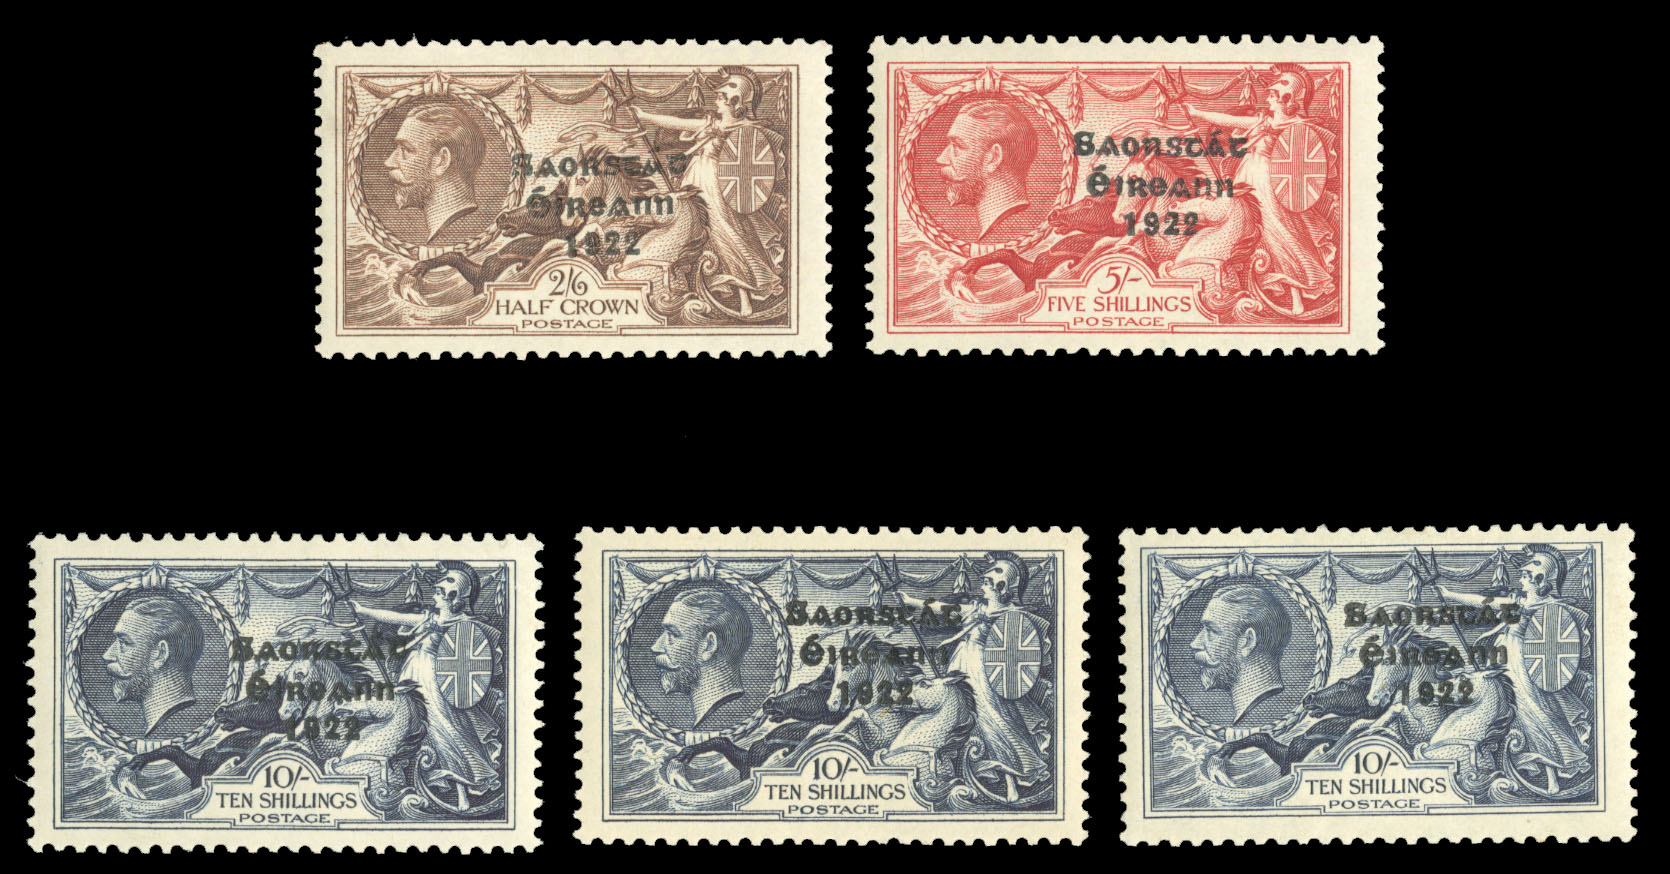 Lot 858 - LARGE LOTS AND COLLECTIONS KOREA  -  Cherrystone Auctions Rare Stamps & Postal History of the World